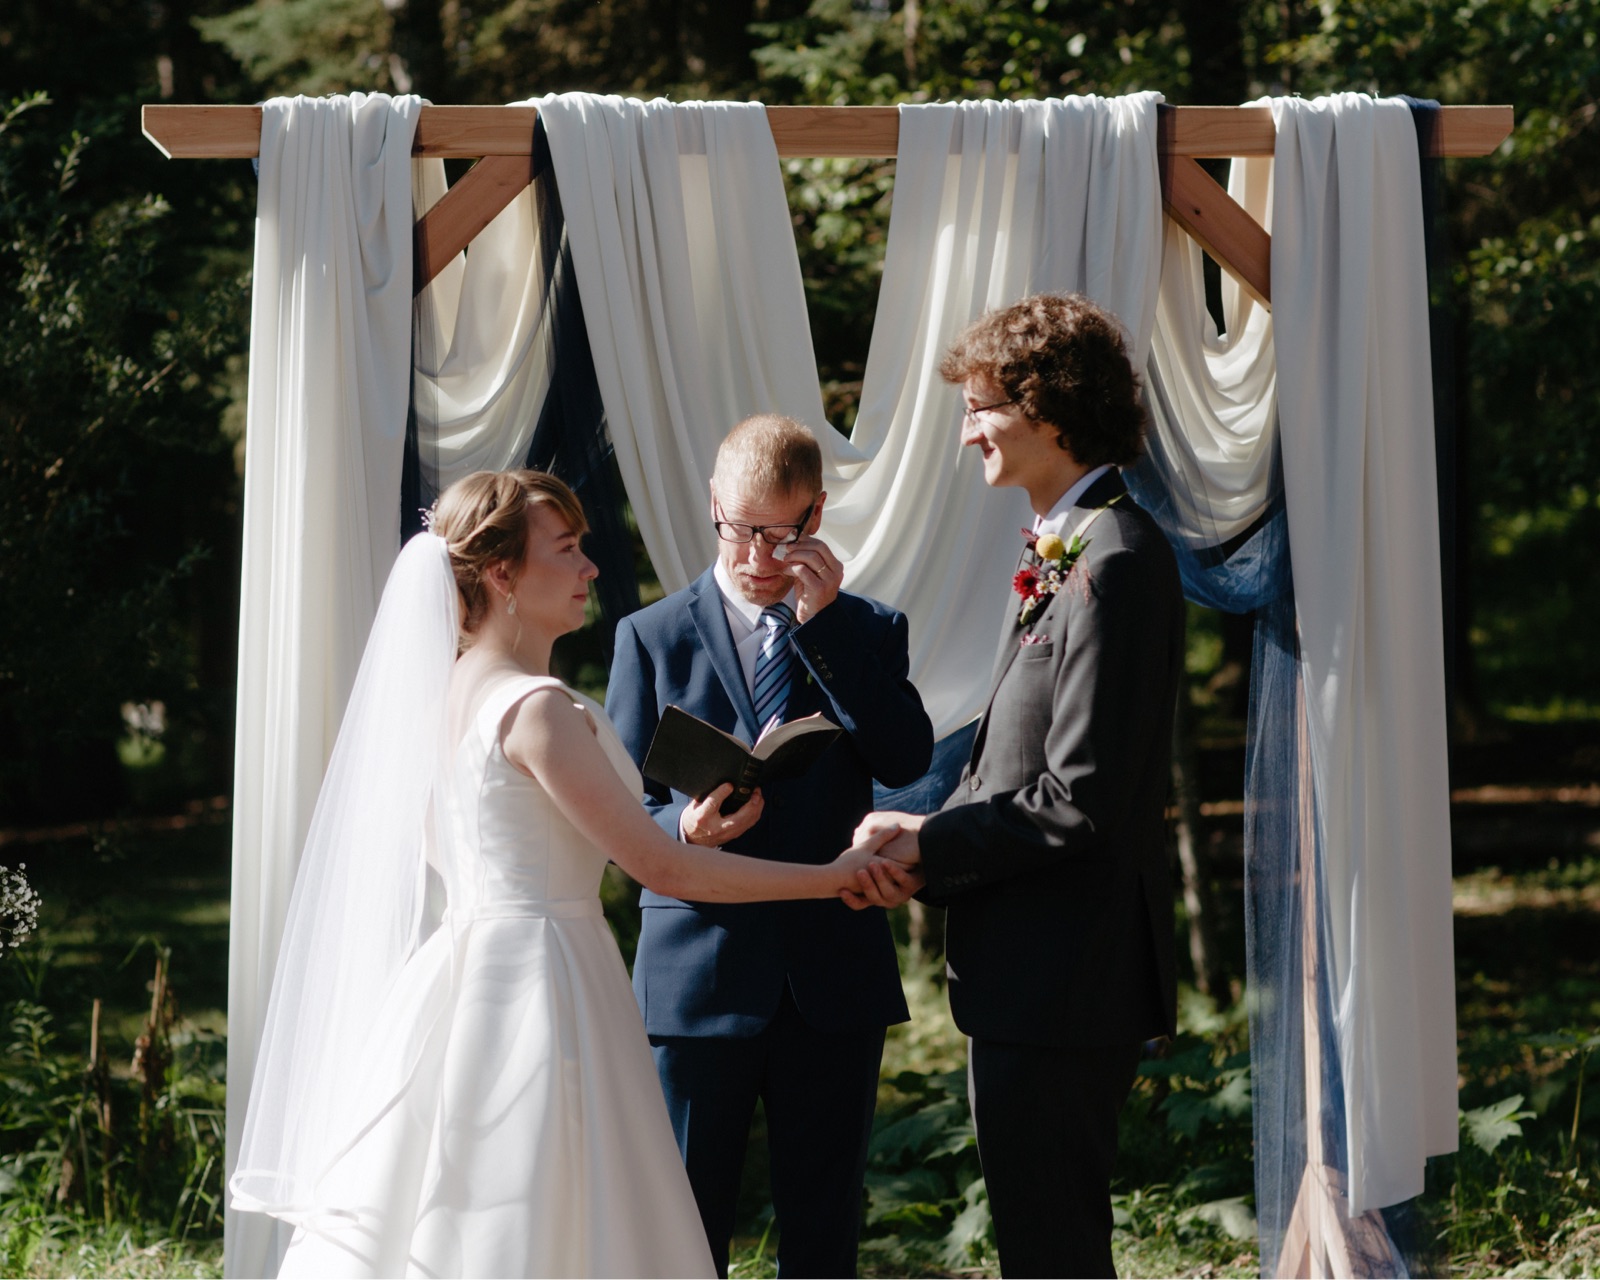 Father of the bride officiating her wedding in Kananaskis Country